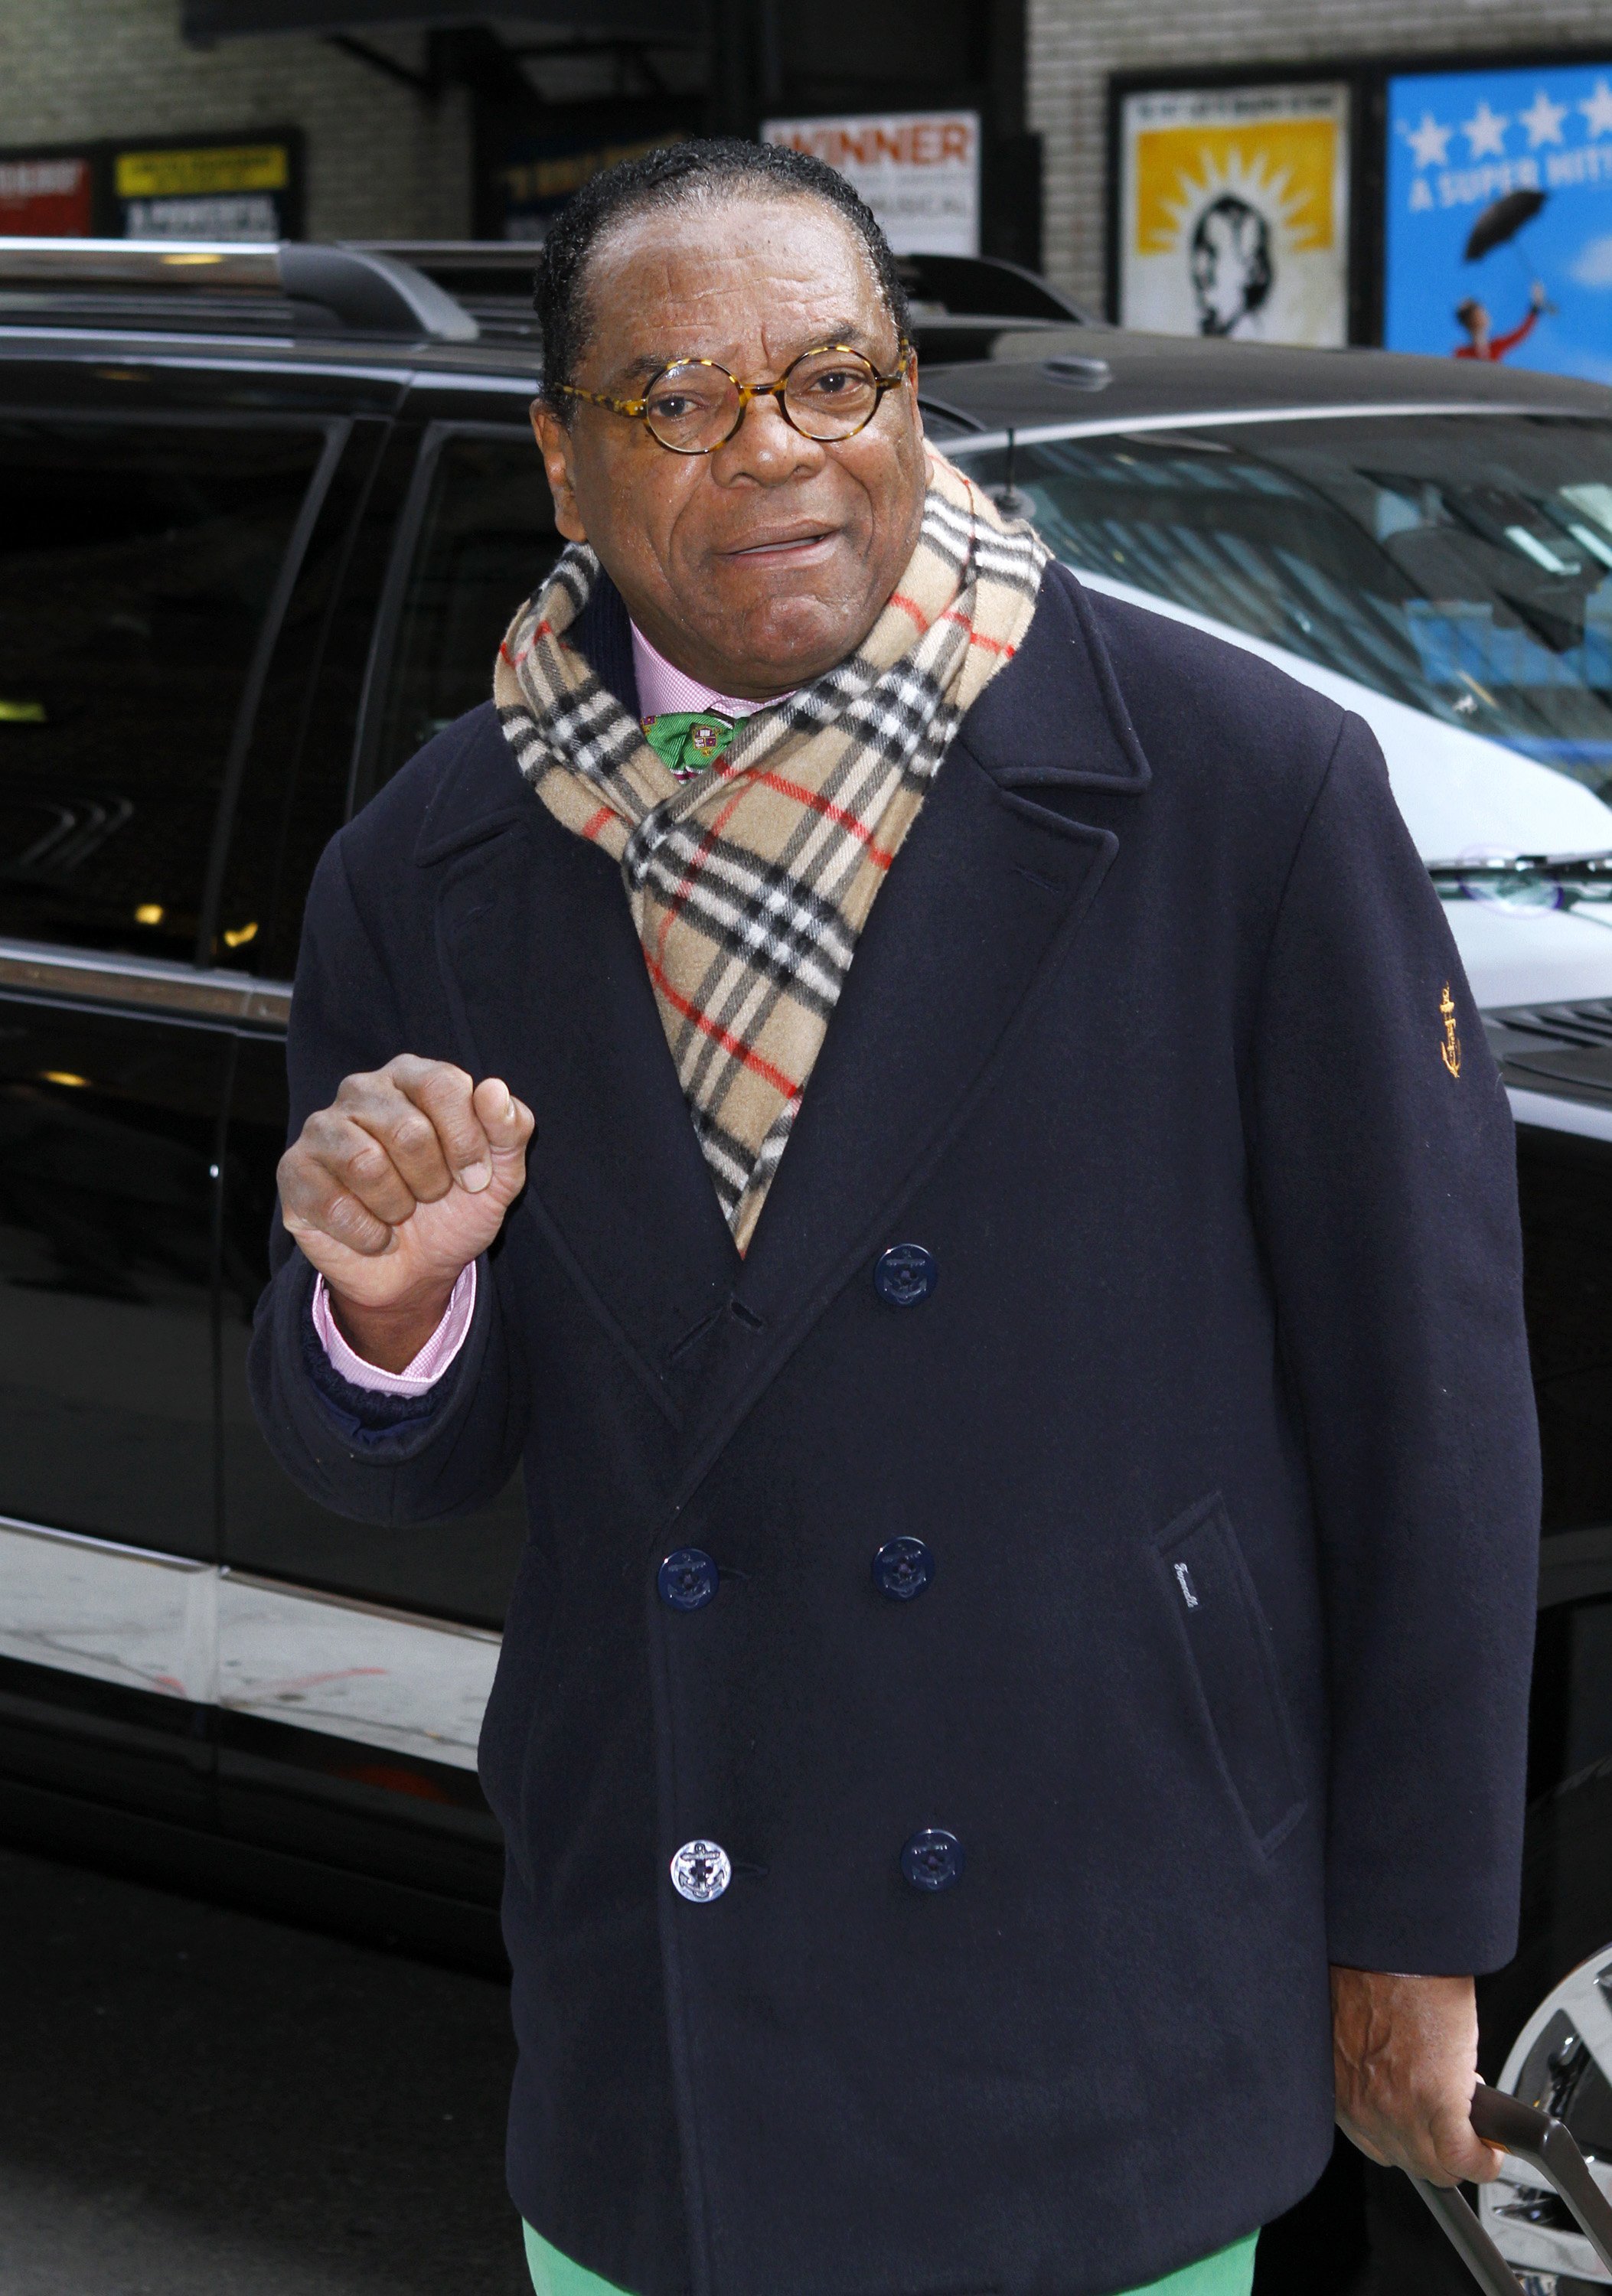 John Witherspoon arrives for "The Late Show with David Letterman" on Feb. 22, 2012 in New York City | Photo: Getty Images